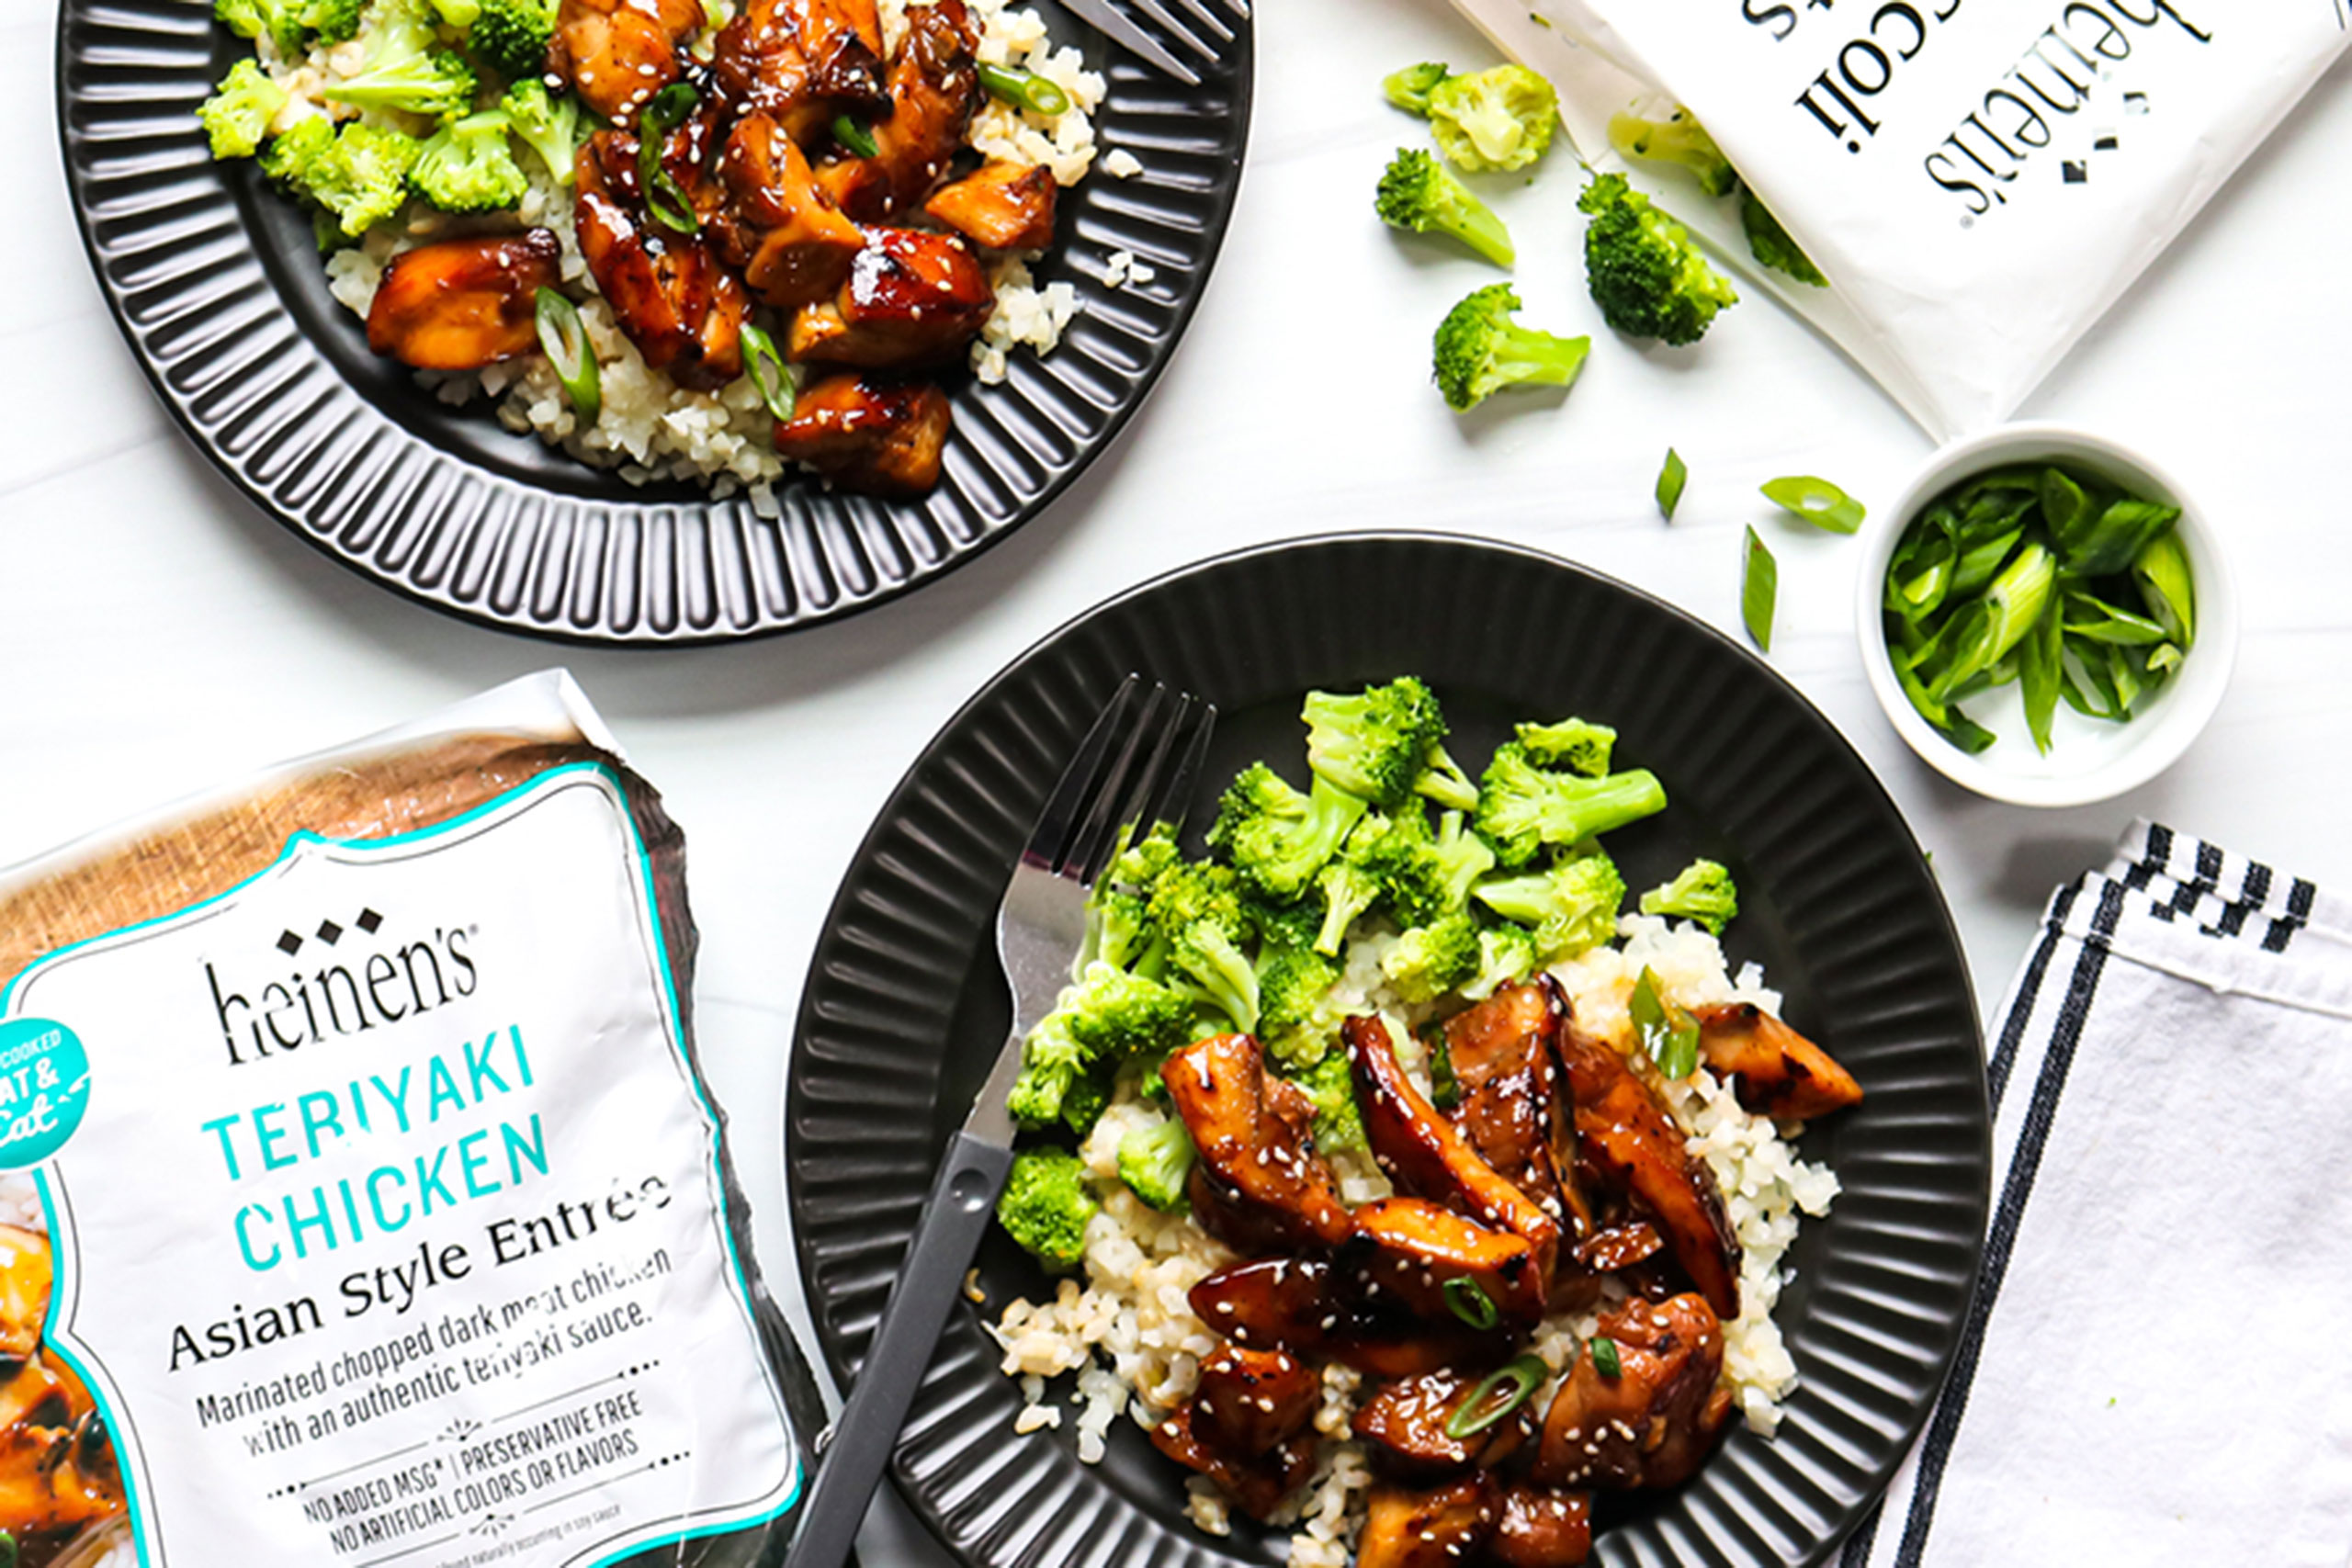 Teriyaki Chicken and Broccoli in Bowls with Heinen's Packaging